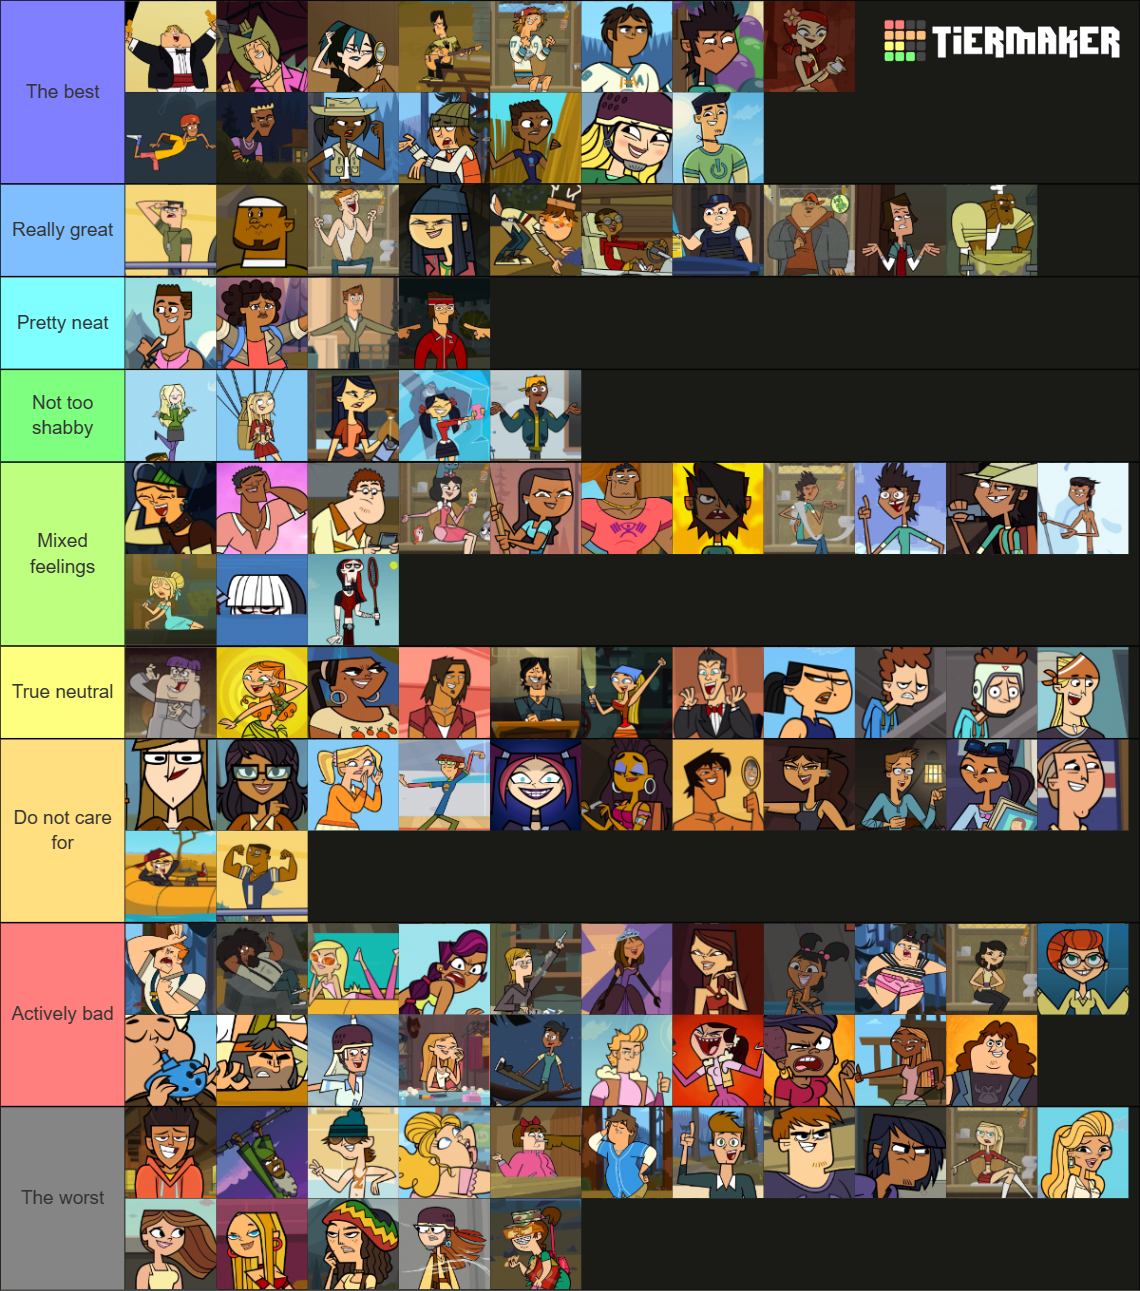 the tier list of all time (they are ordered from best to worst